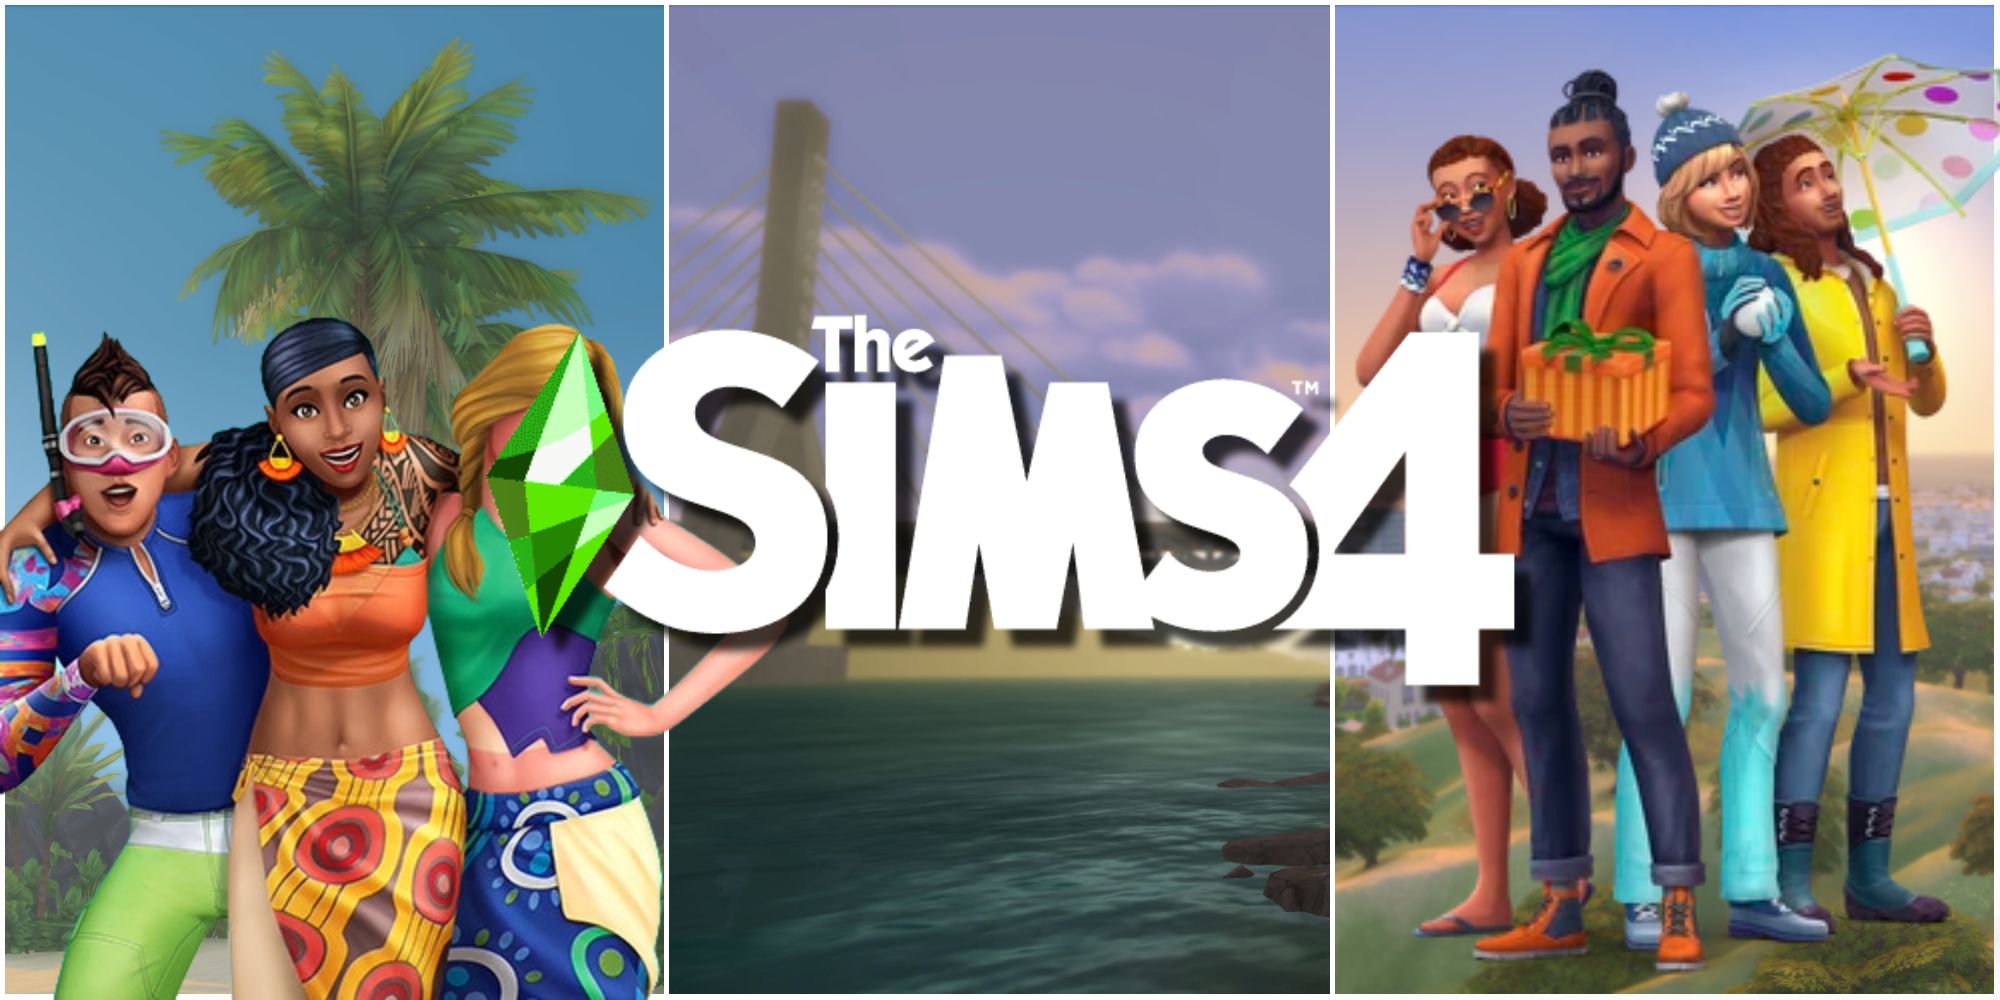 Photos of three of the hottest worlds in the game, including Sims representing different seasons